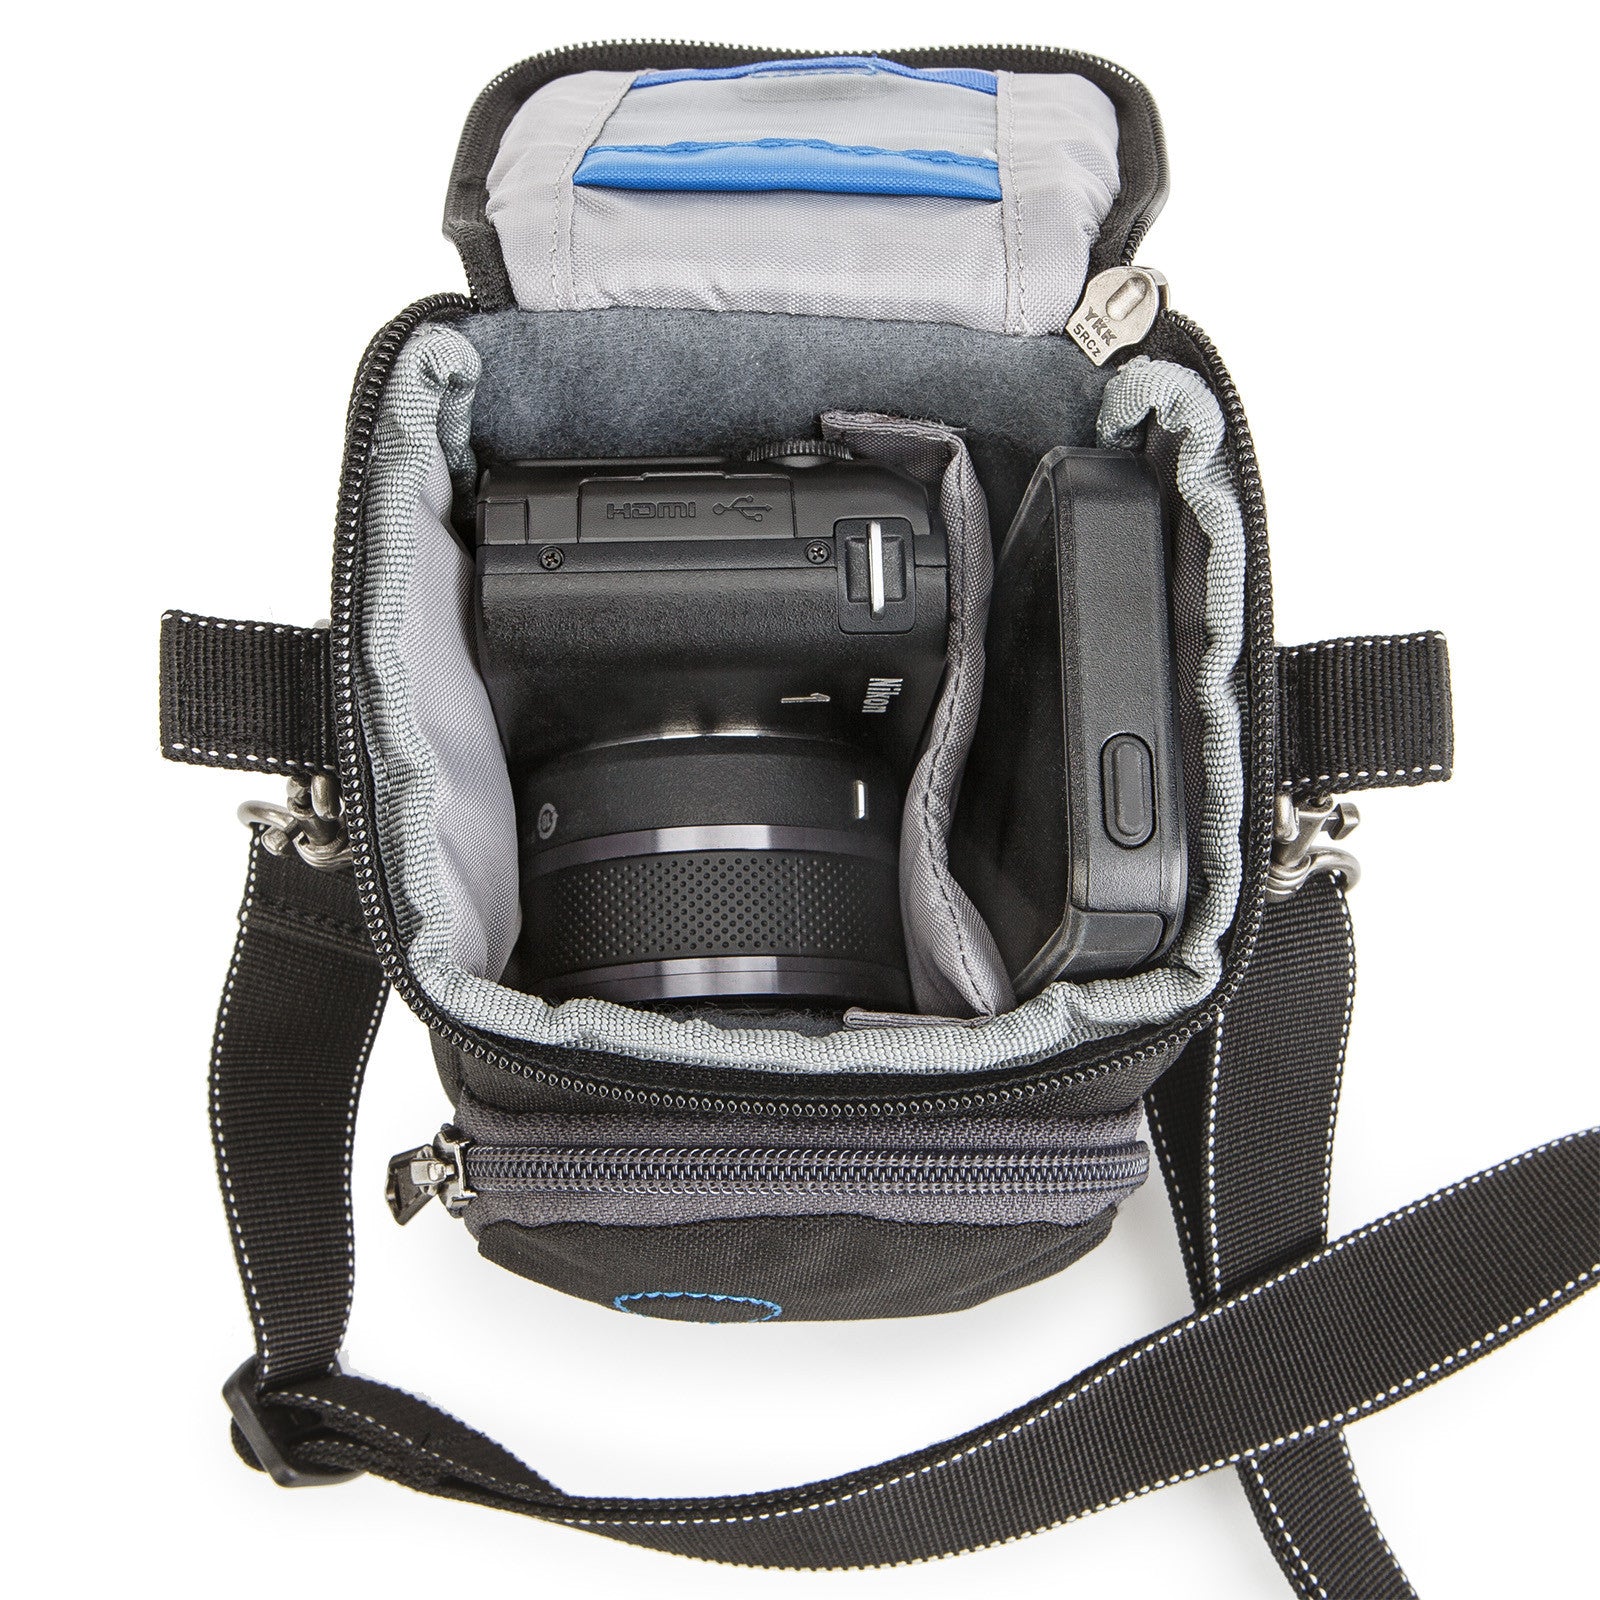 Think Tank Mirrorless Mover 5 Camera Bag (Charcoal), bags shoulder bags, Think Tank Photo - Pictureline  - 2